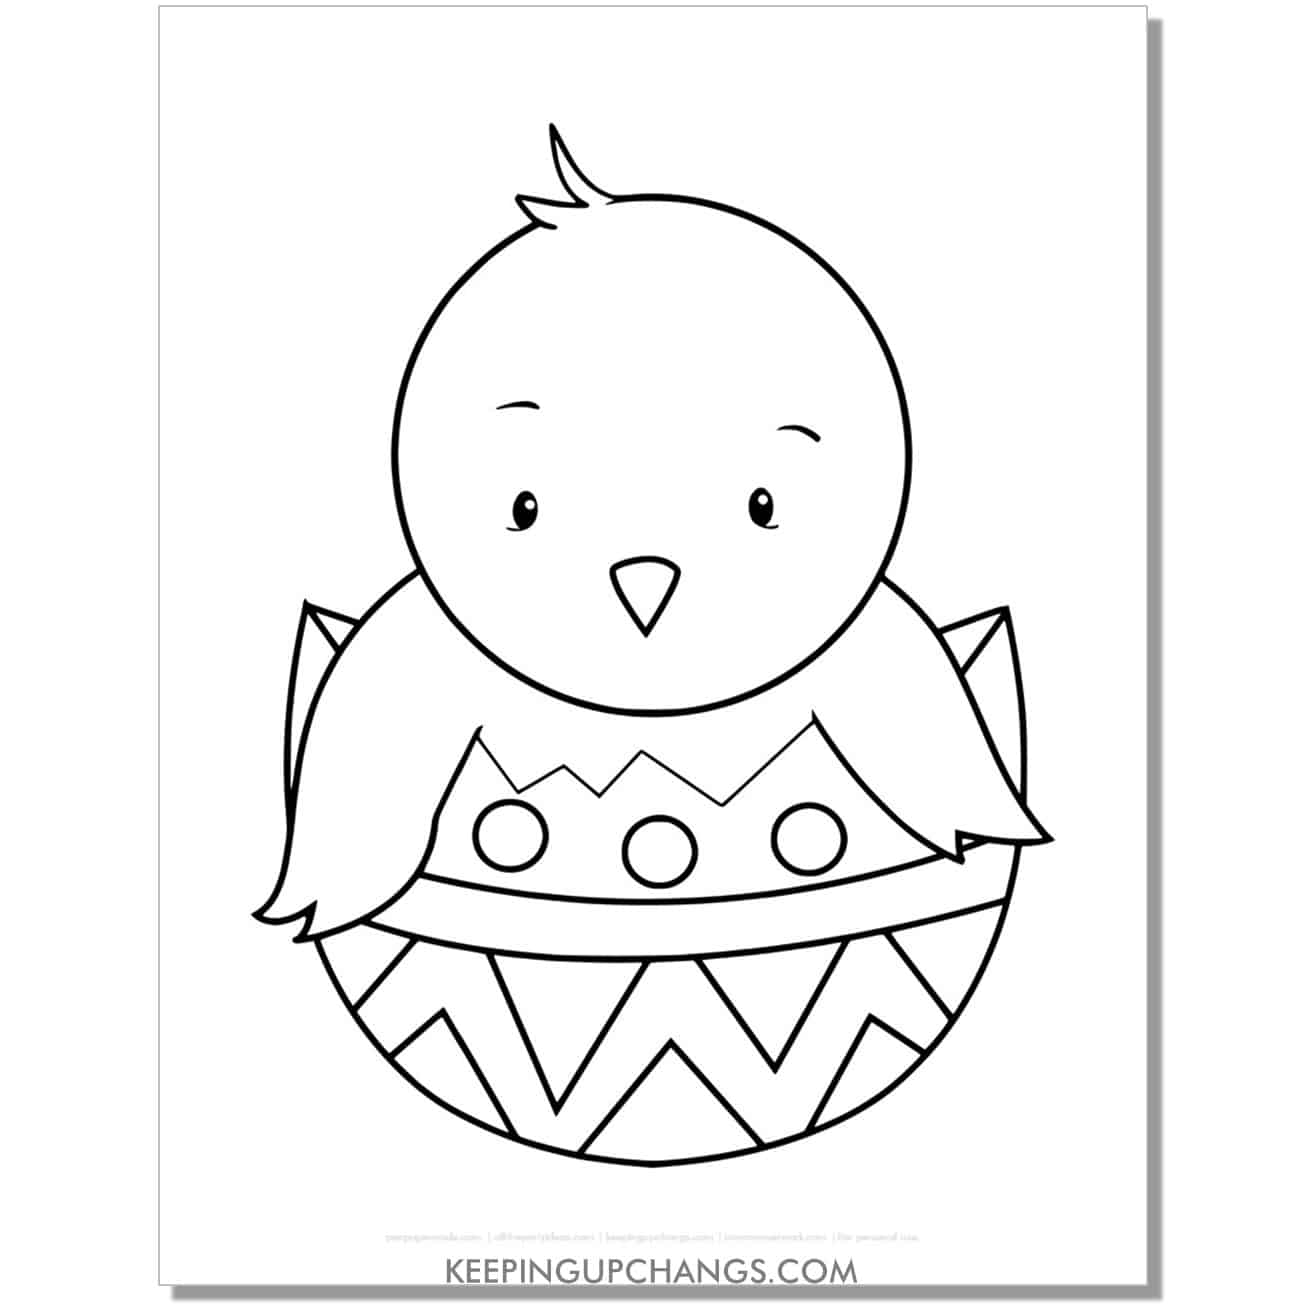 easter chick hatching from egg coloring page, sheet.